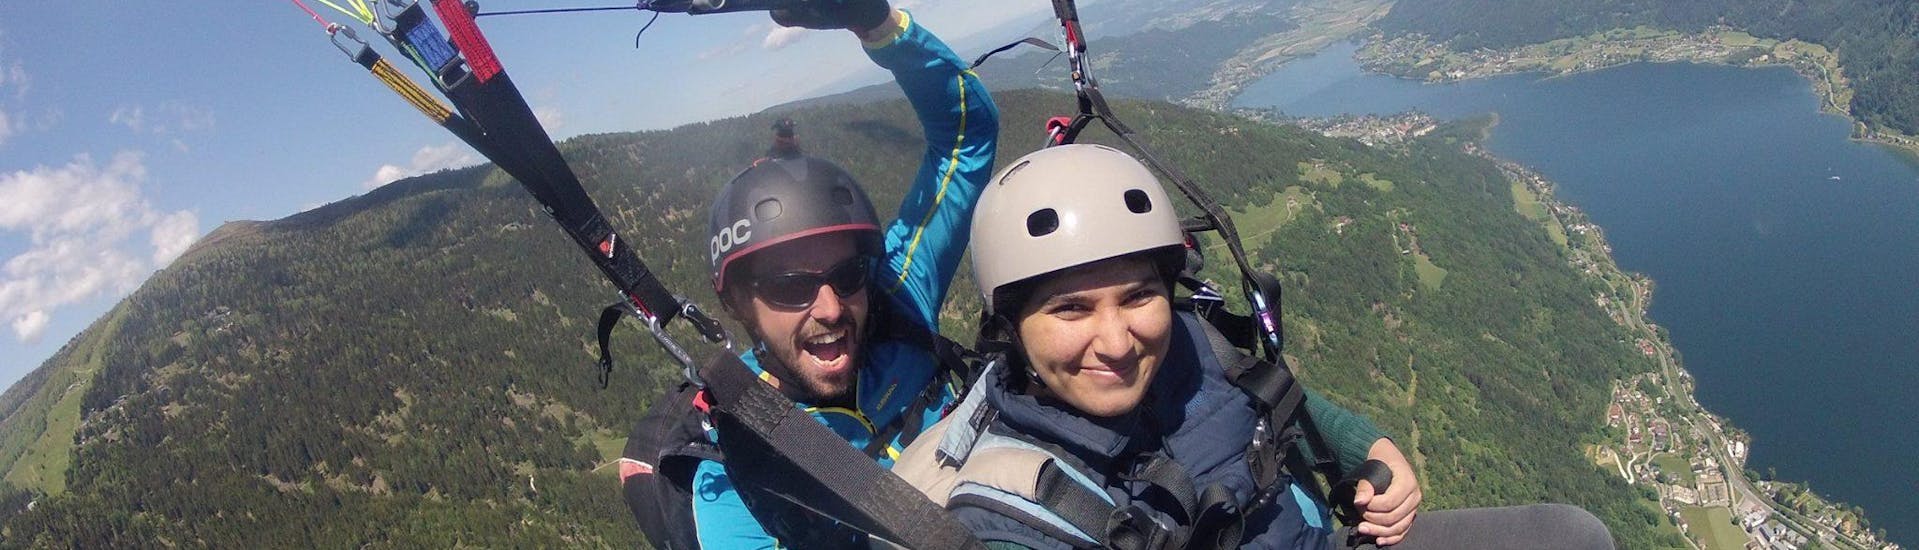 Tandem Paragliding from Gerlitzen - Thermal Flight with Adventure-Wings Ossiachersee - Hero image